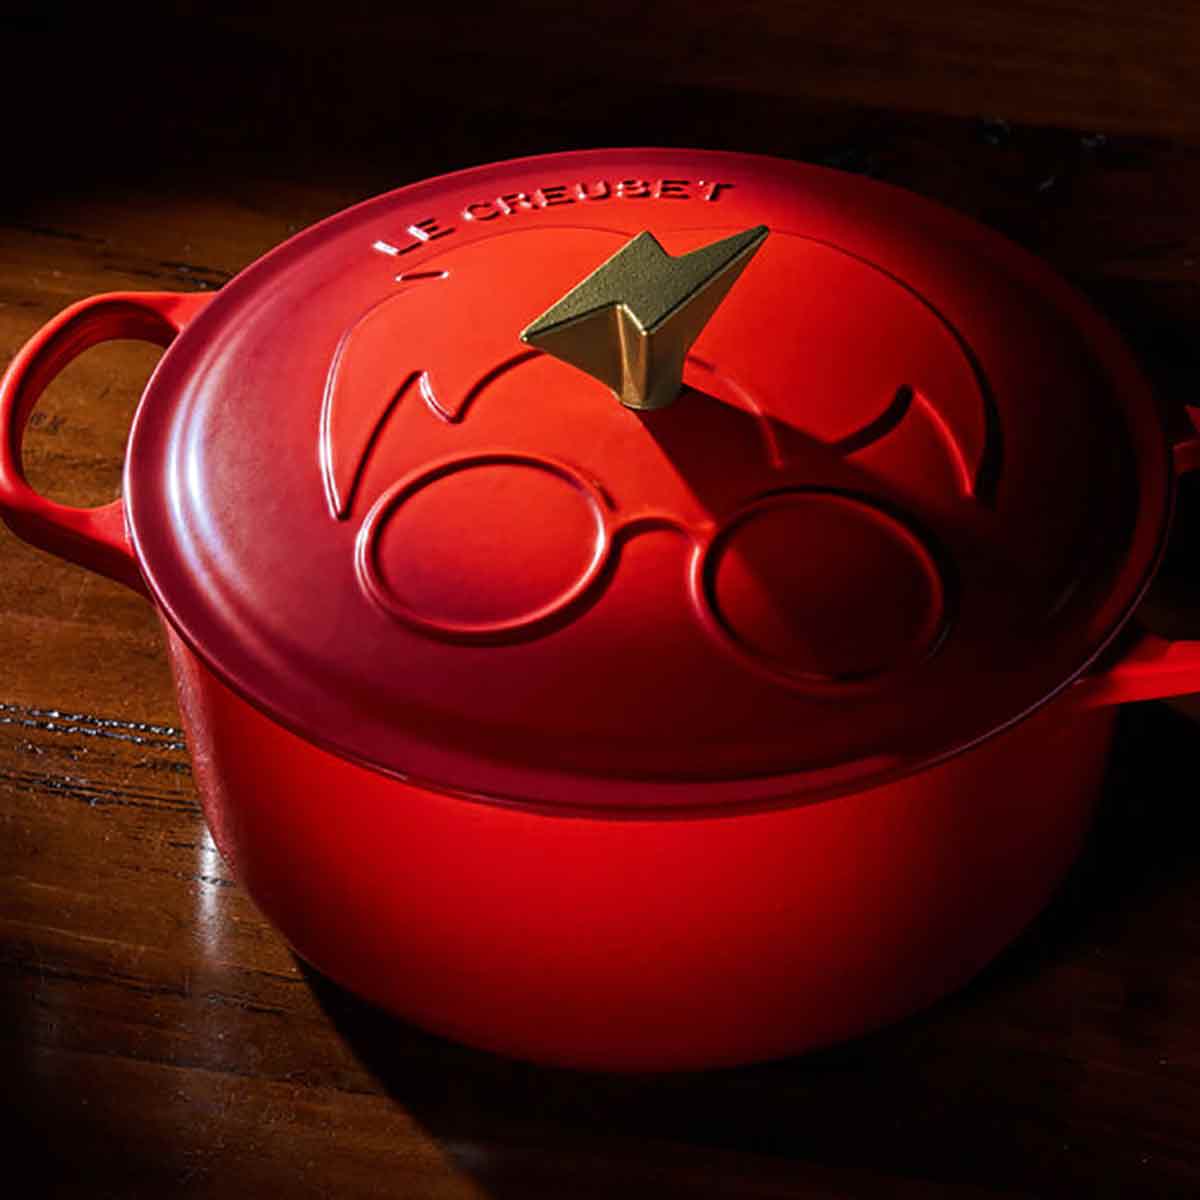 Harry Potter Dutch Oven from Le Creuset